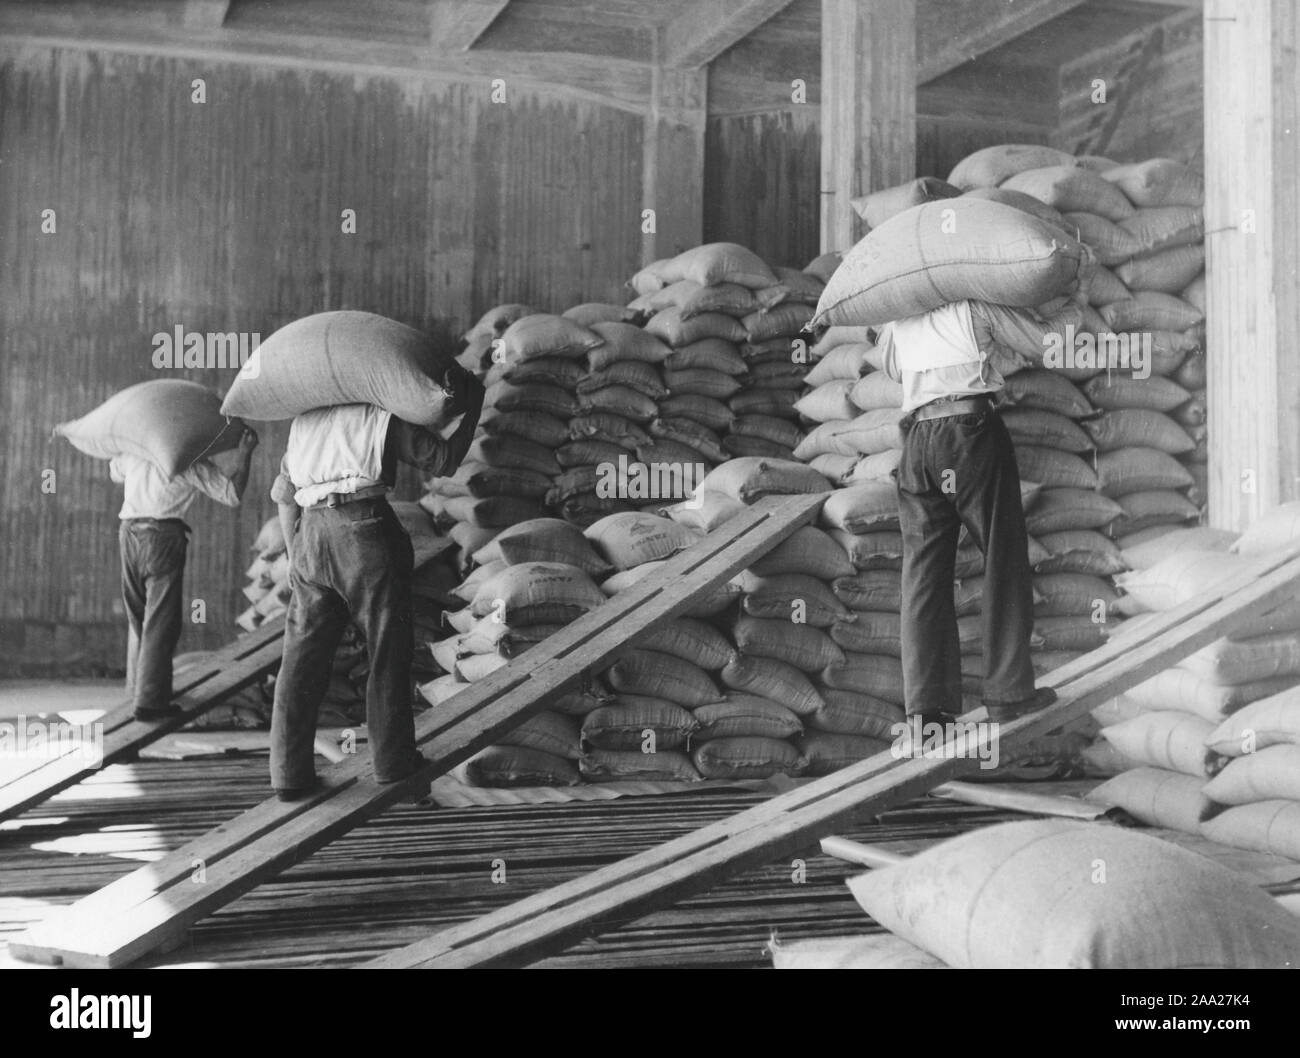 Workers at the docks. Men unloading and storing sacks of coffee at a warehouse in Gothenburg Sweden in the 1940s. Stock Photo